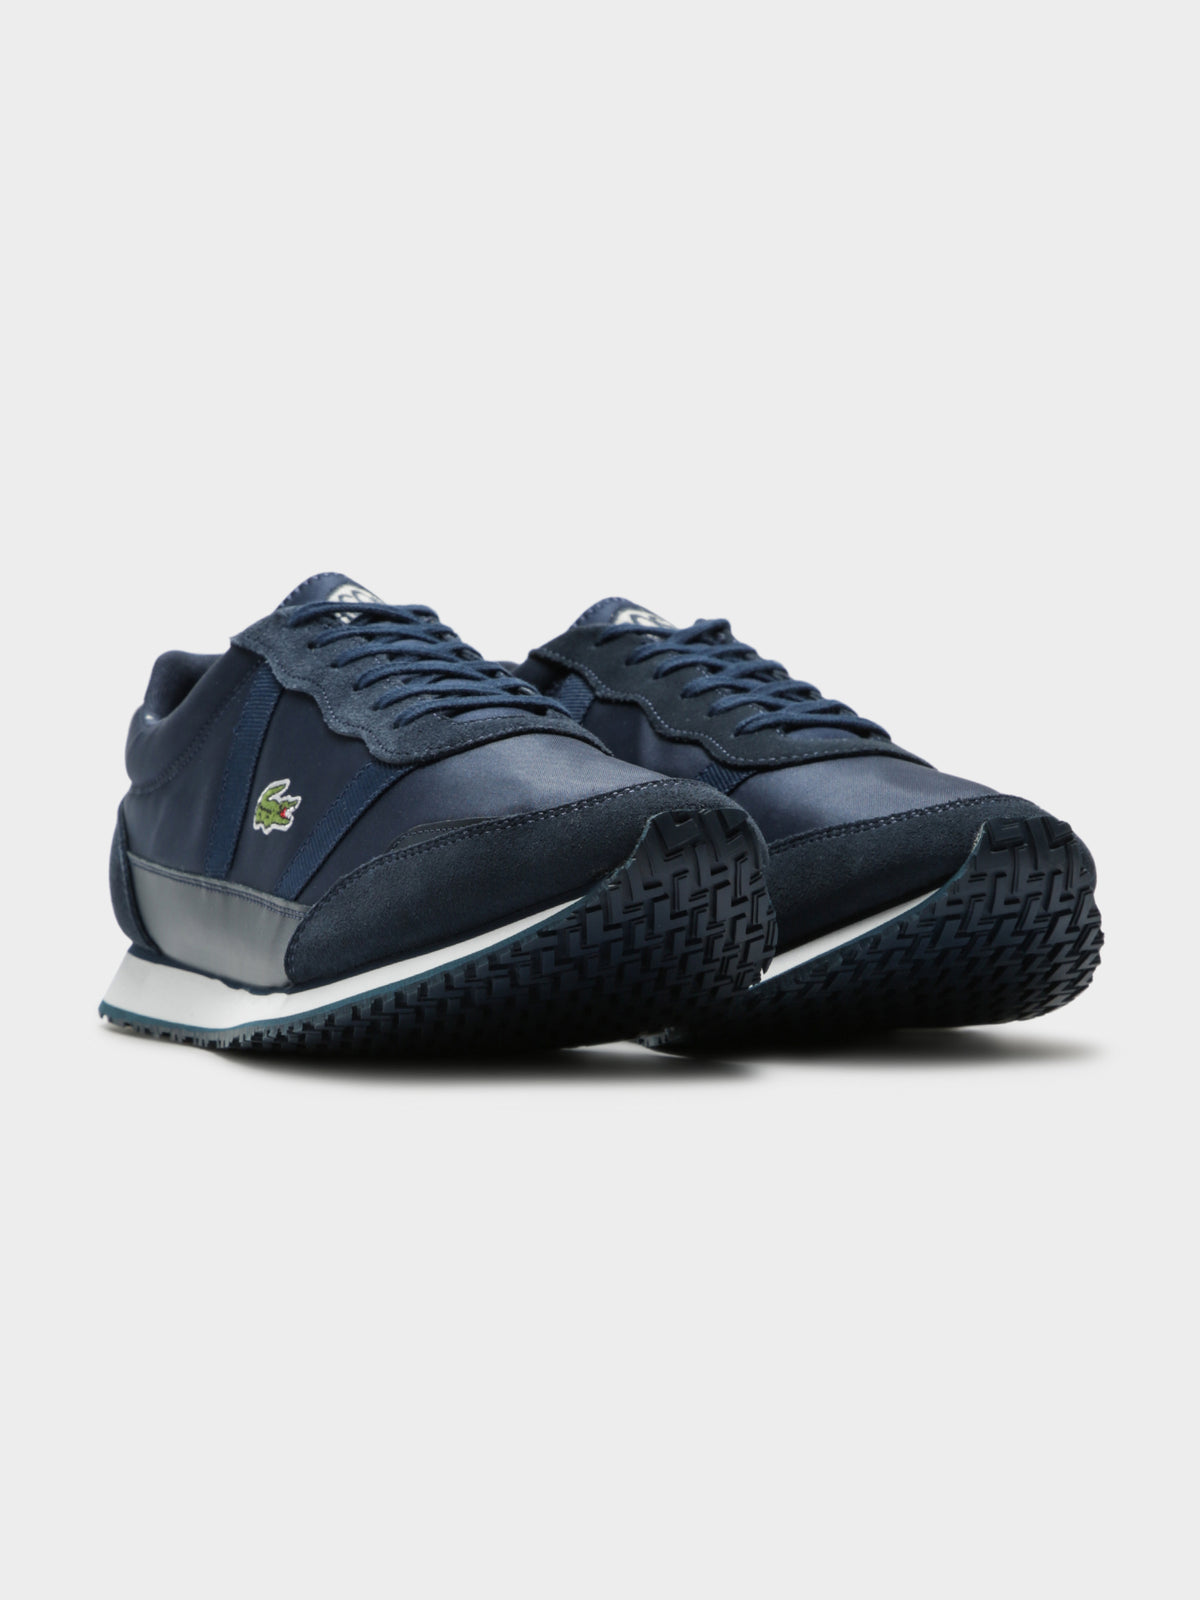 Mens Partner 119 4 Sneakers in Navy and White